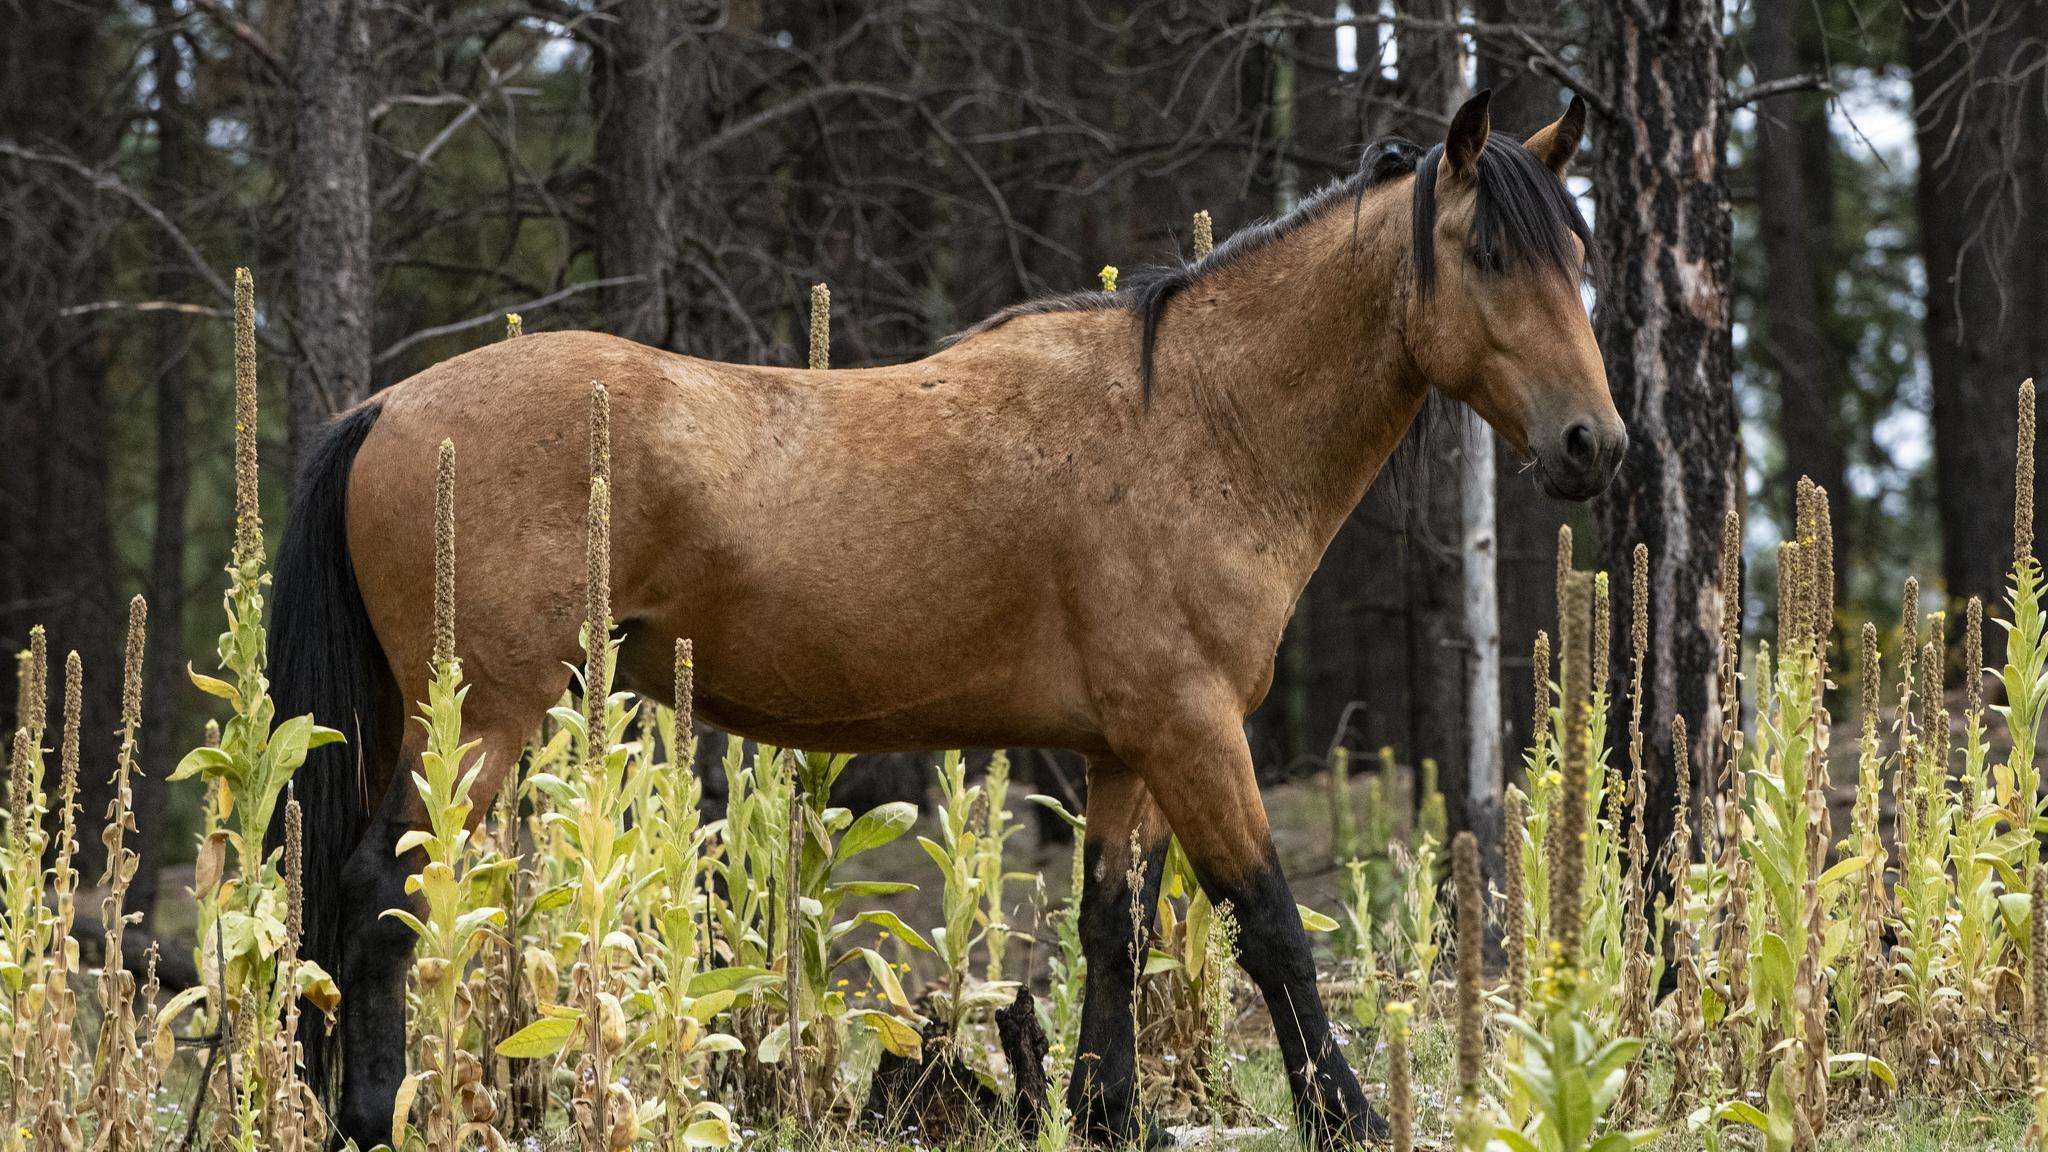 Brown horse in a field with pine trees behind.